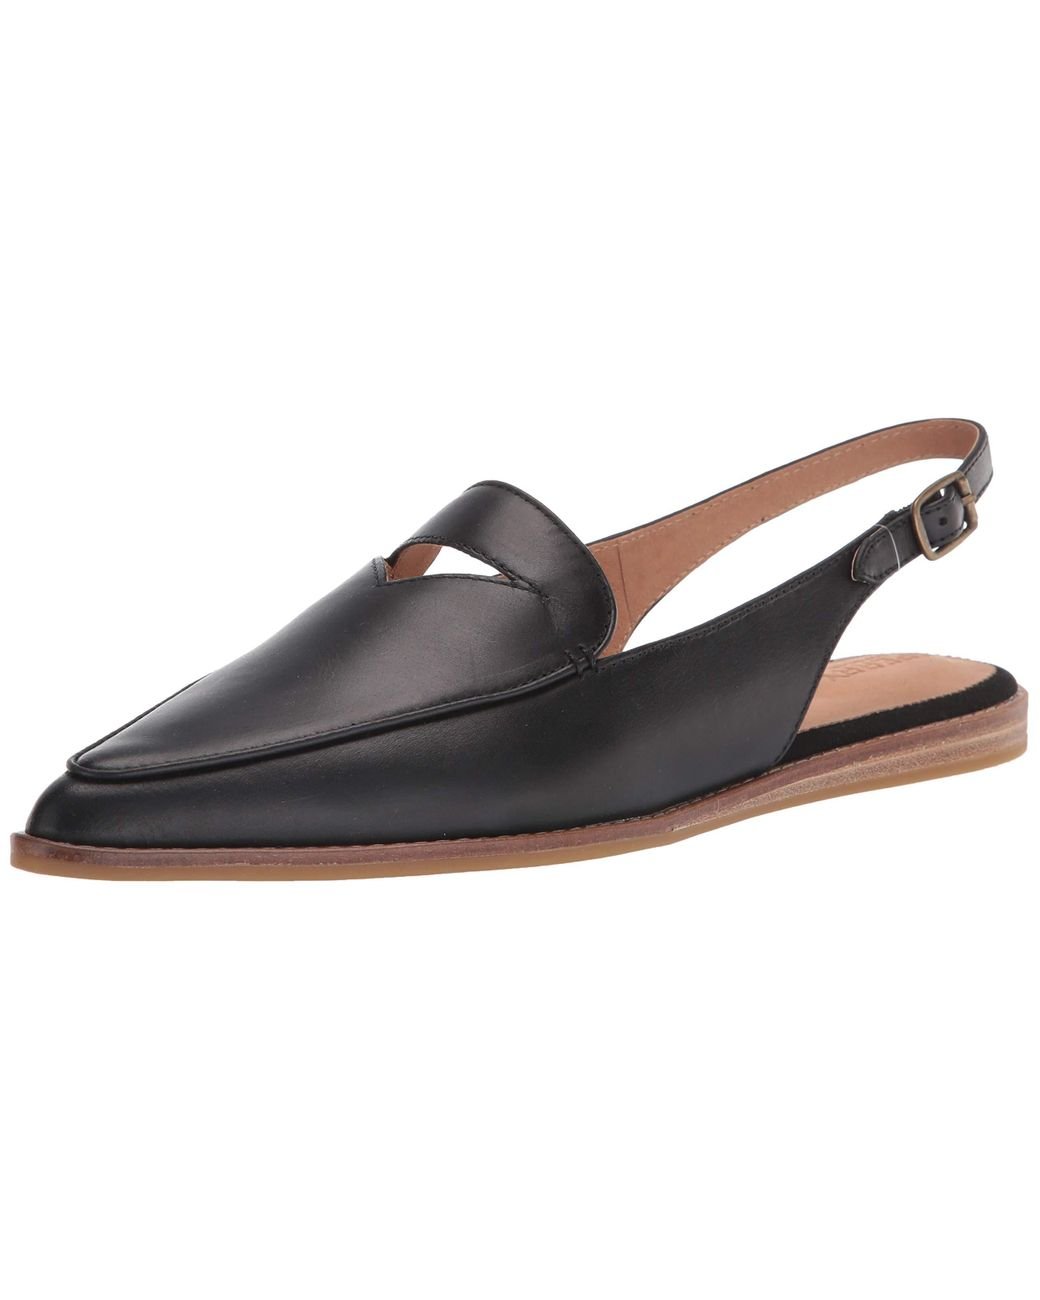 Sperry Top-Sider Saybrook Slingback Suede Loafer Flat in Black - Lyst